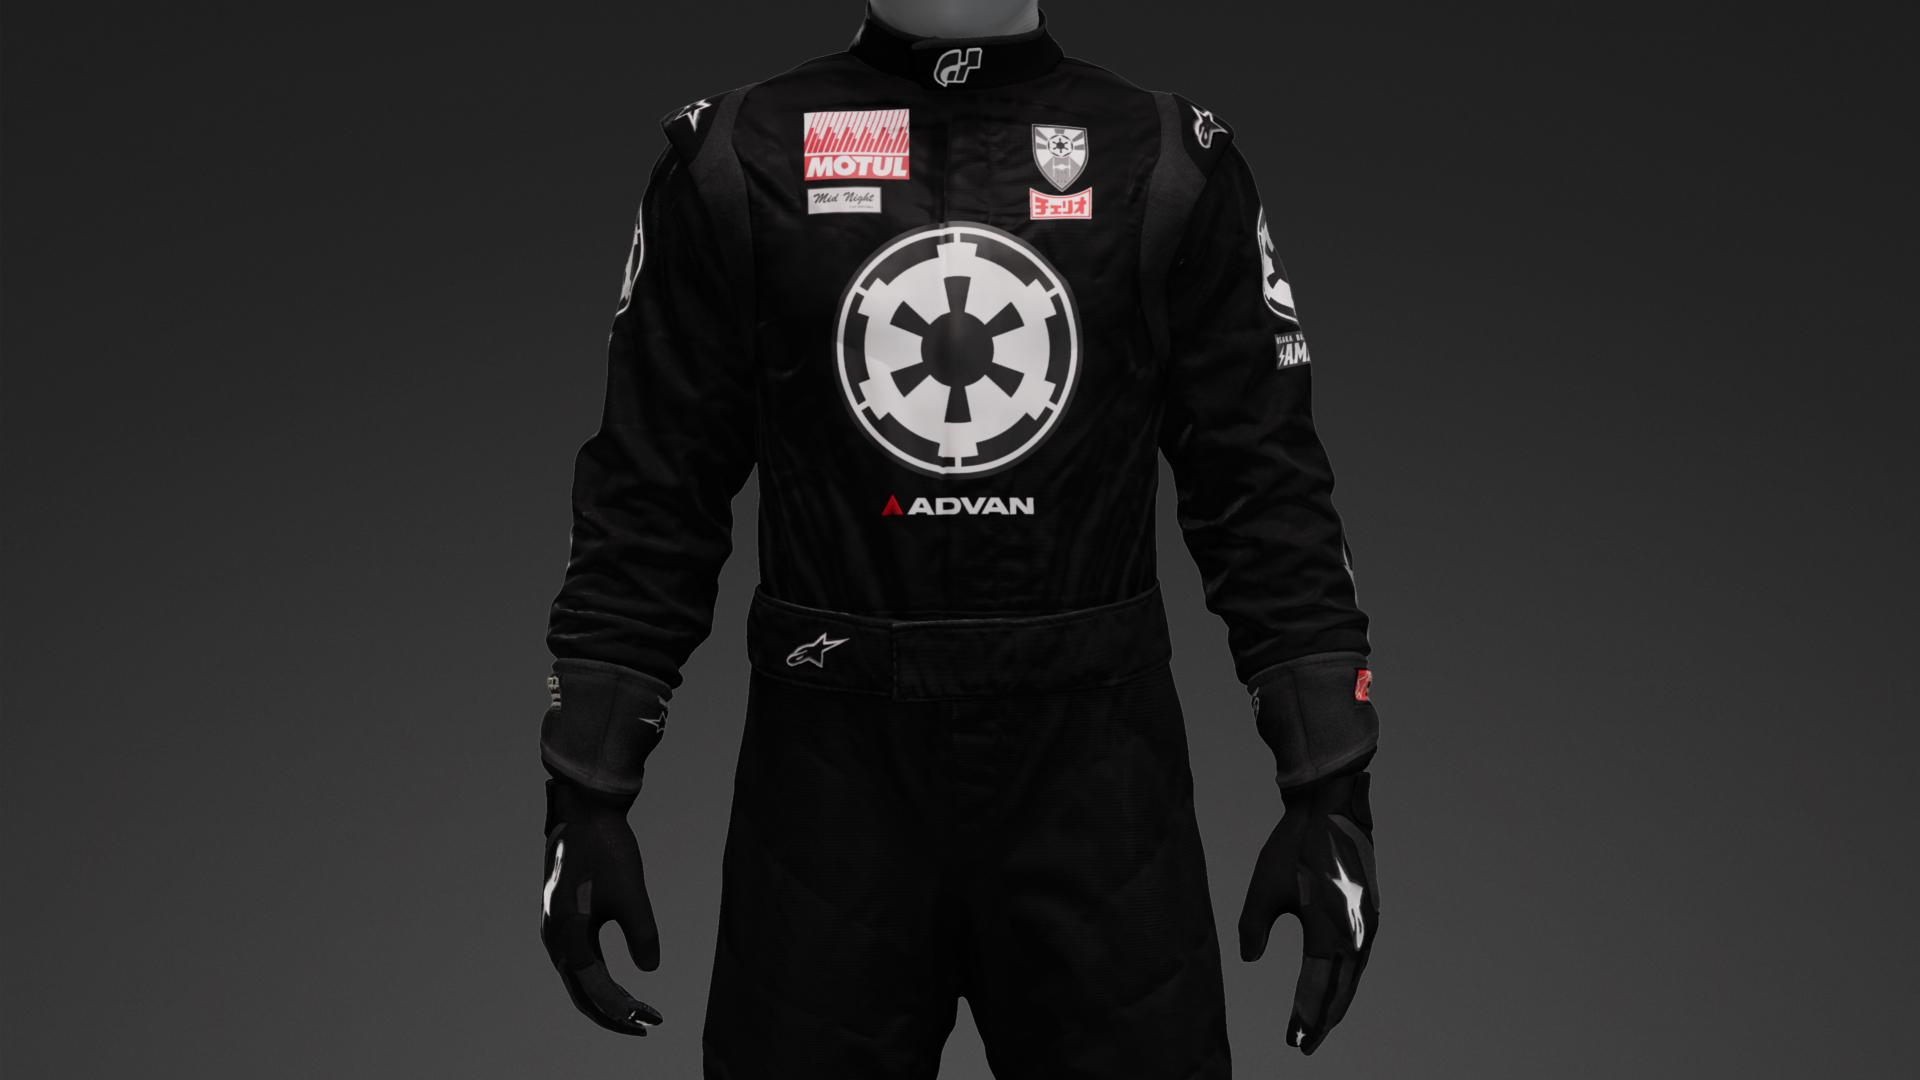 TIE Fighter Pilot Livery by RokerEsp. Community. Gran Turismo Sport